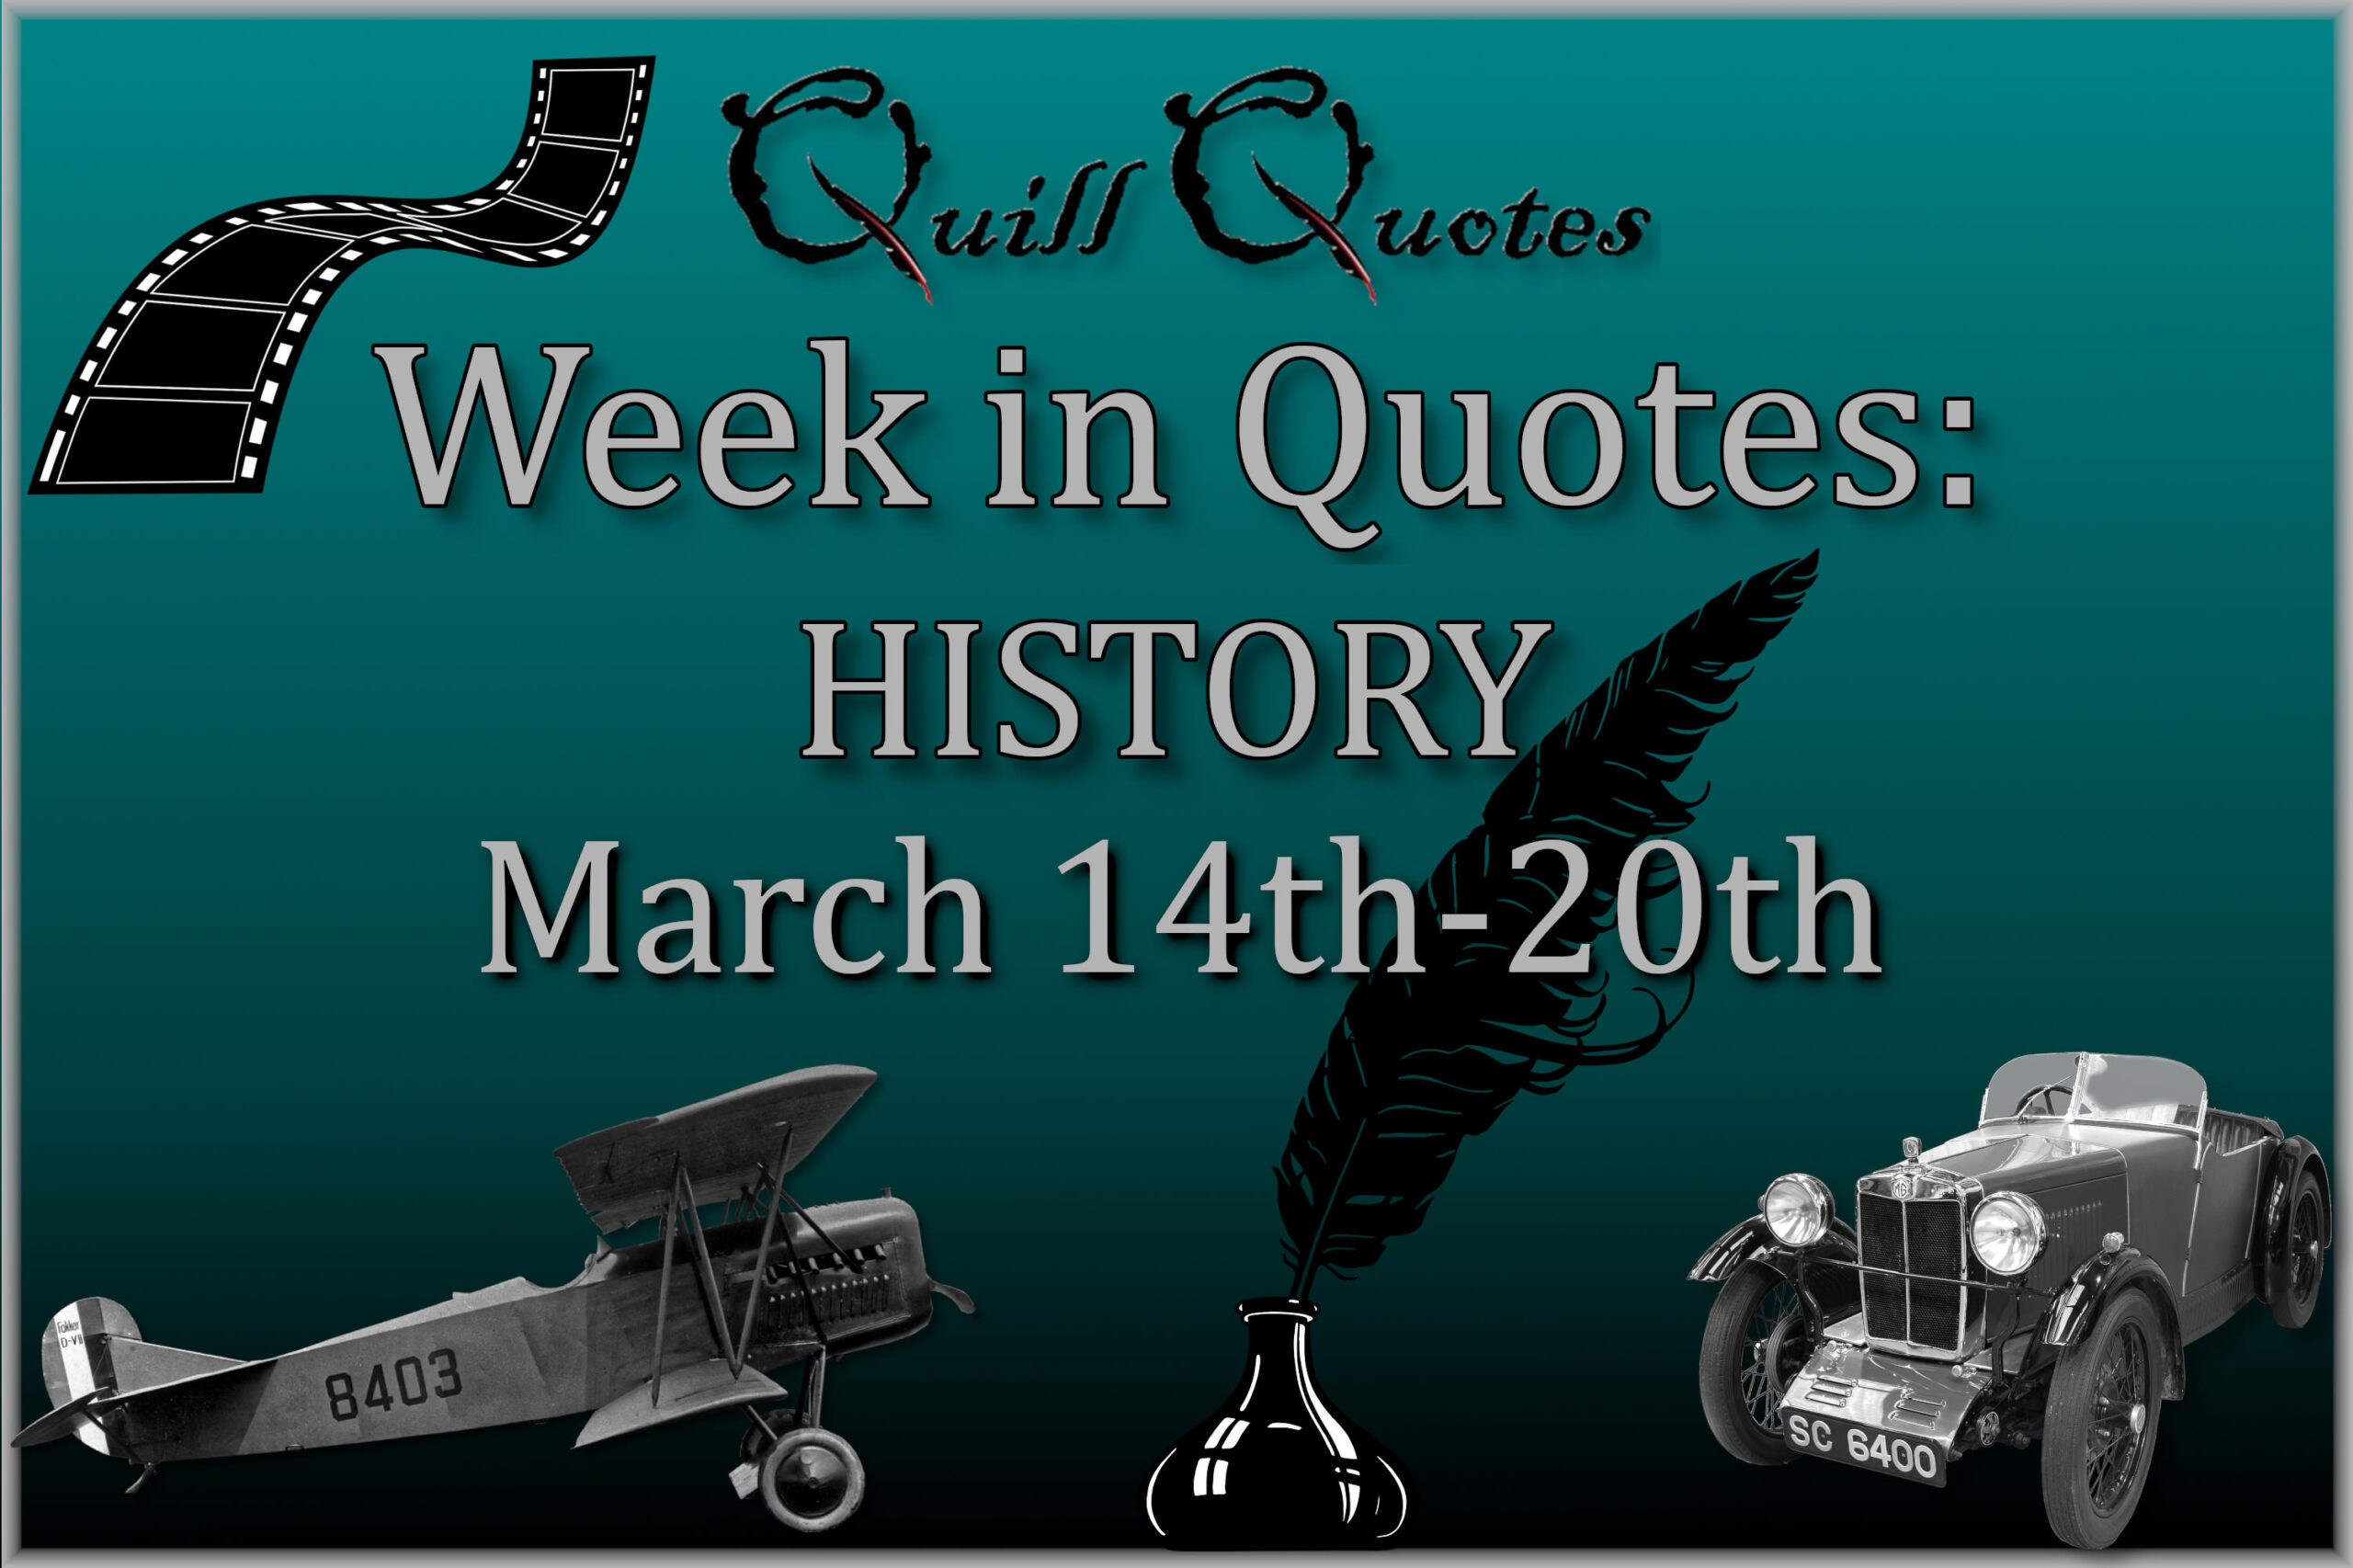 Week in Quotes: HISTORY March 14h-20th